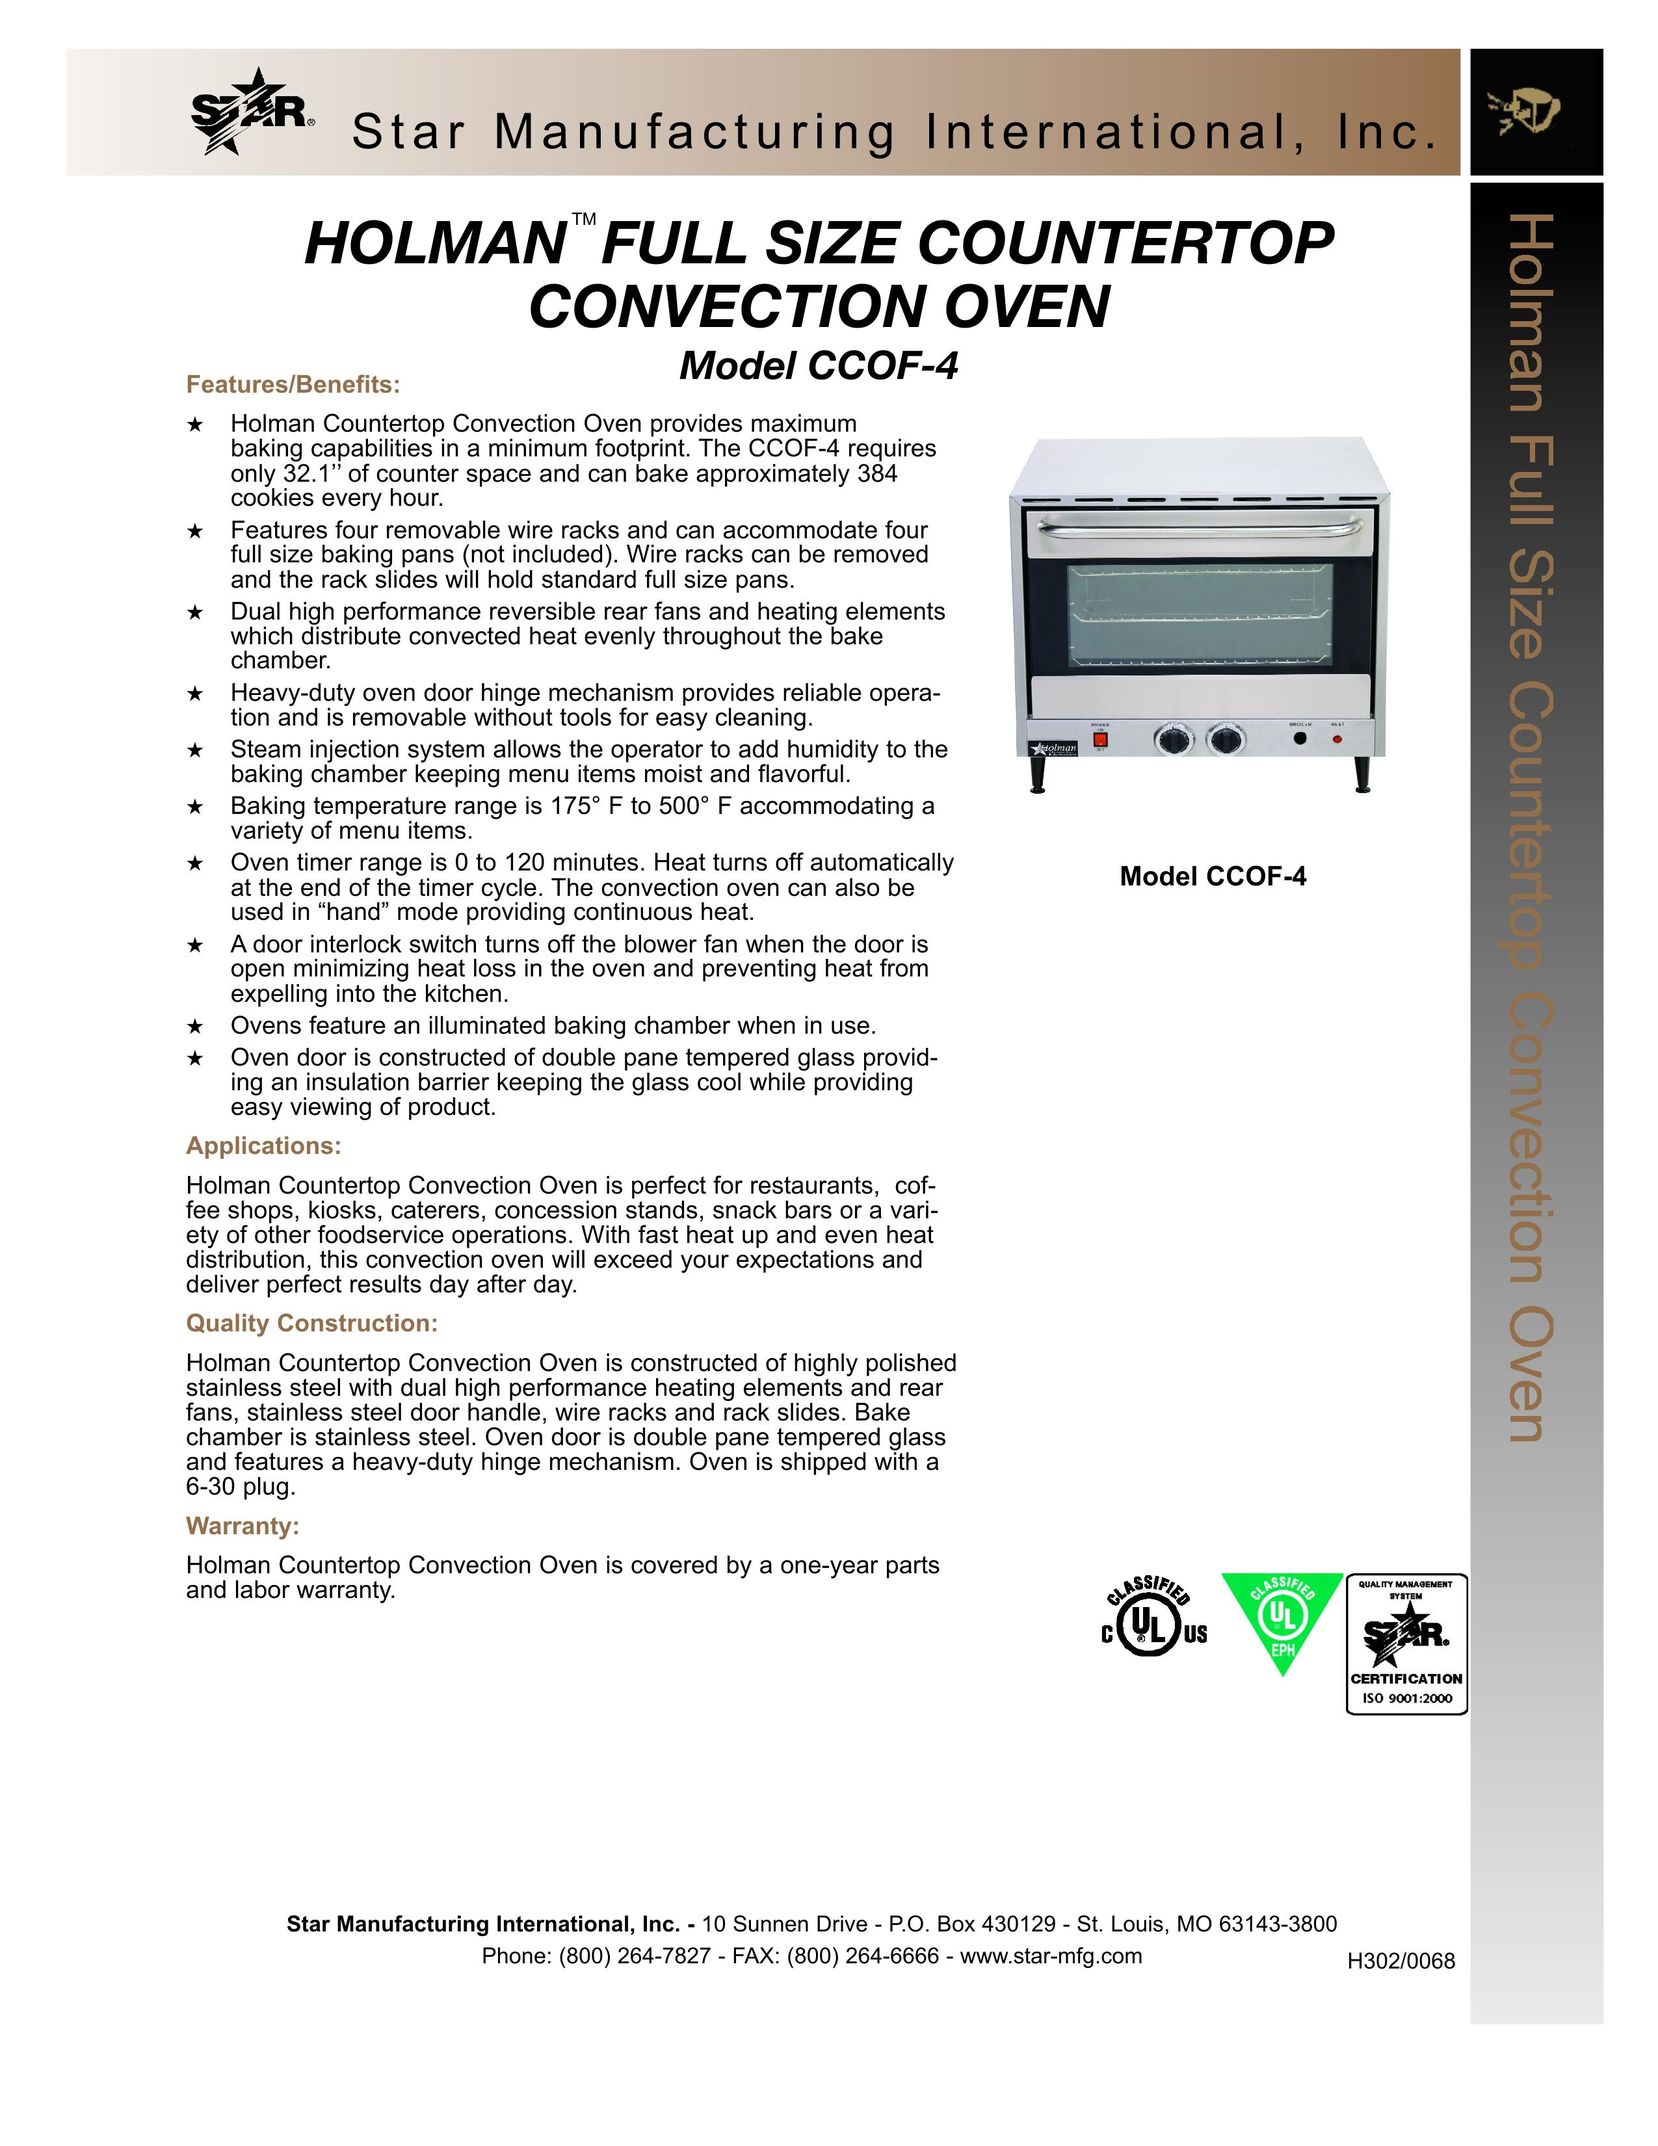 Star Manufacturing CCOF-4 Oven User Manual